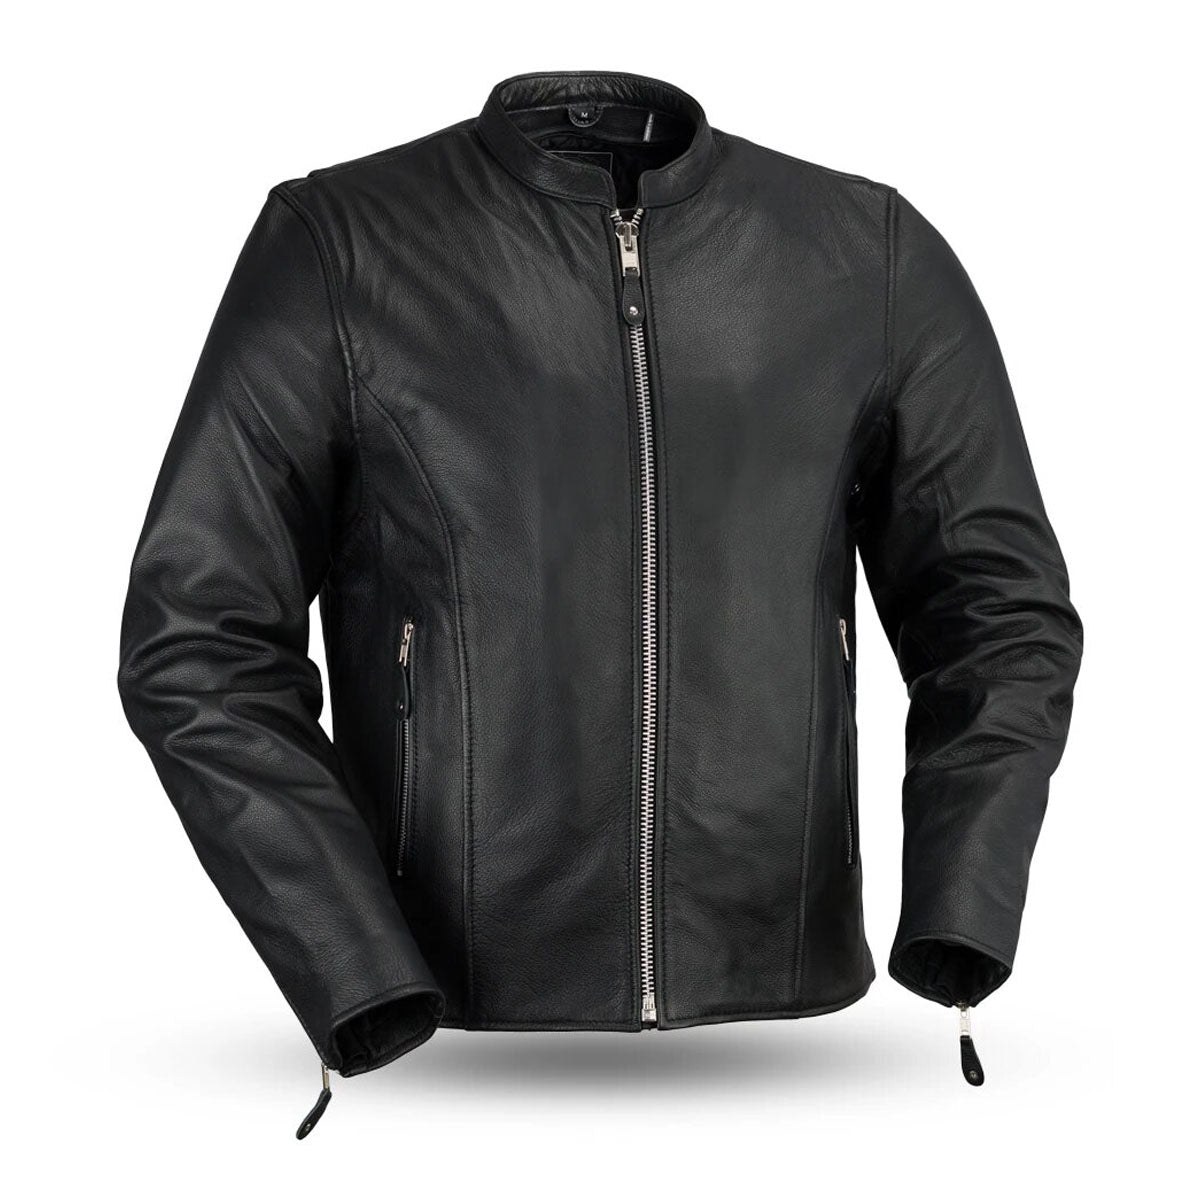 Ace - Clean Cafe Style Men's Leather Jacket